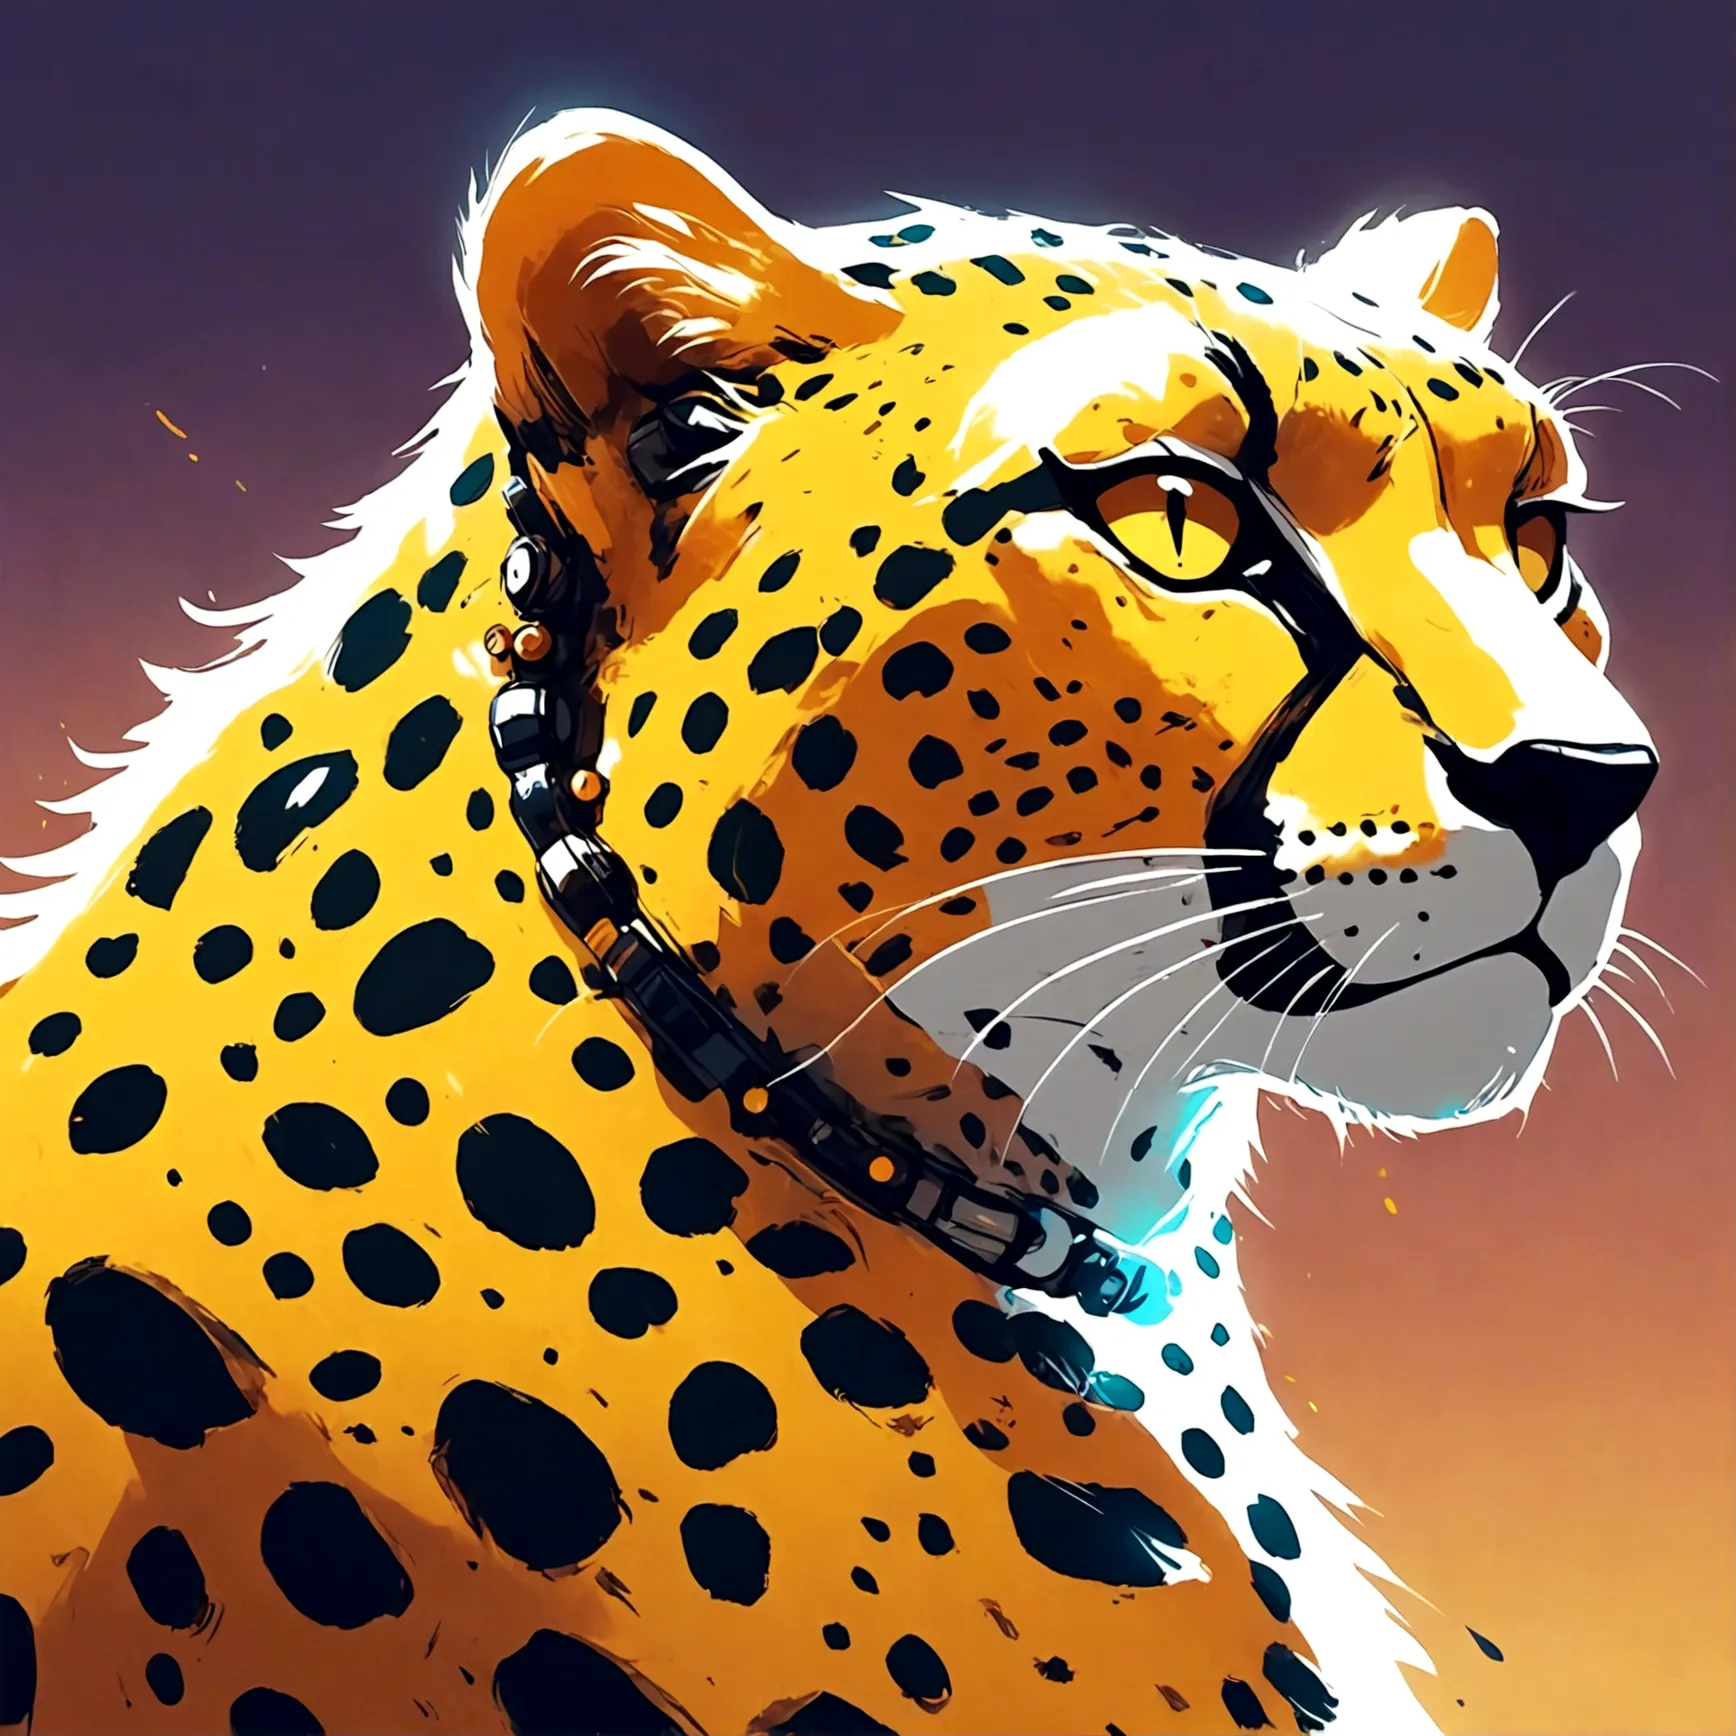 full view of mechanized cheetah in art style of Sam Bosma anime, Painting, Split Toning, Electric Colors, Kodachrome, 2D, 4k, HD...